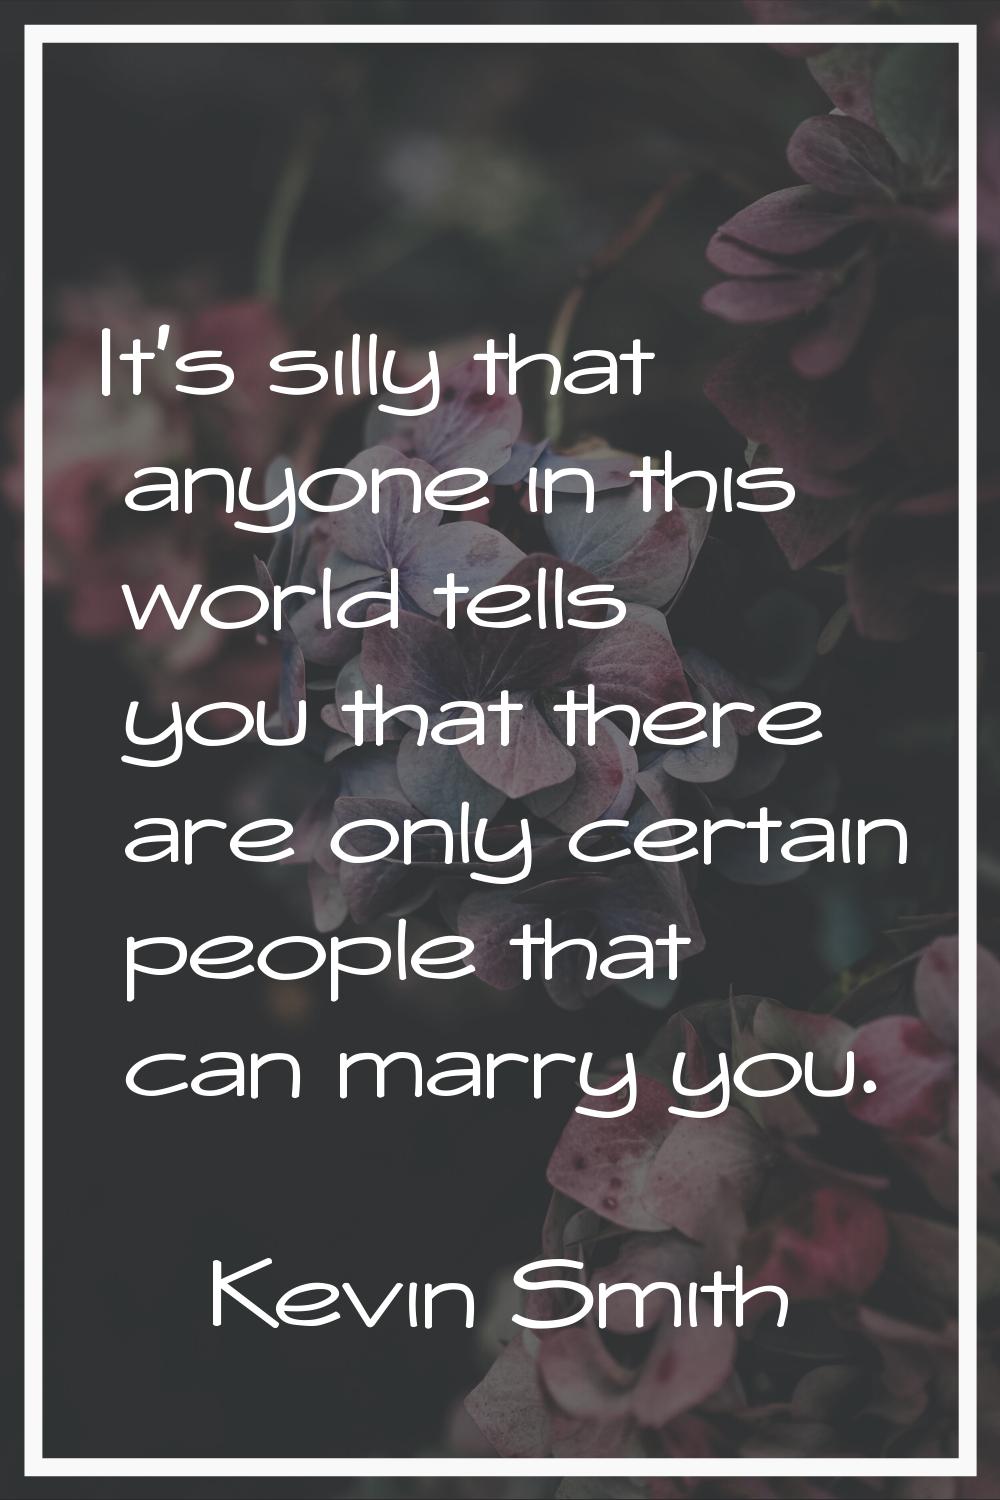 It's silly that anyone in this world tells you that there are only certain people that can marry yo